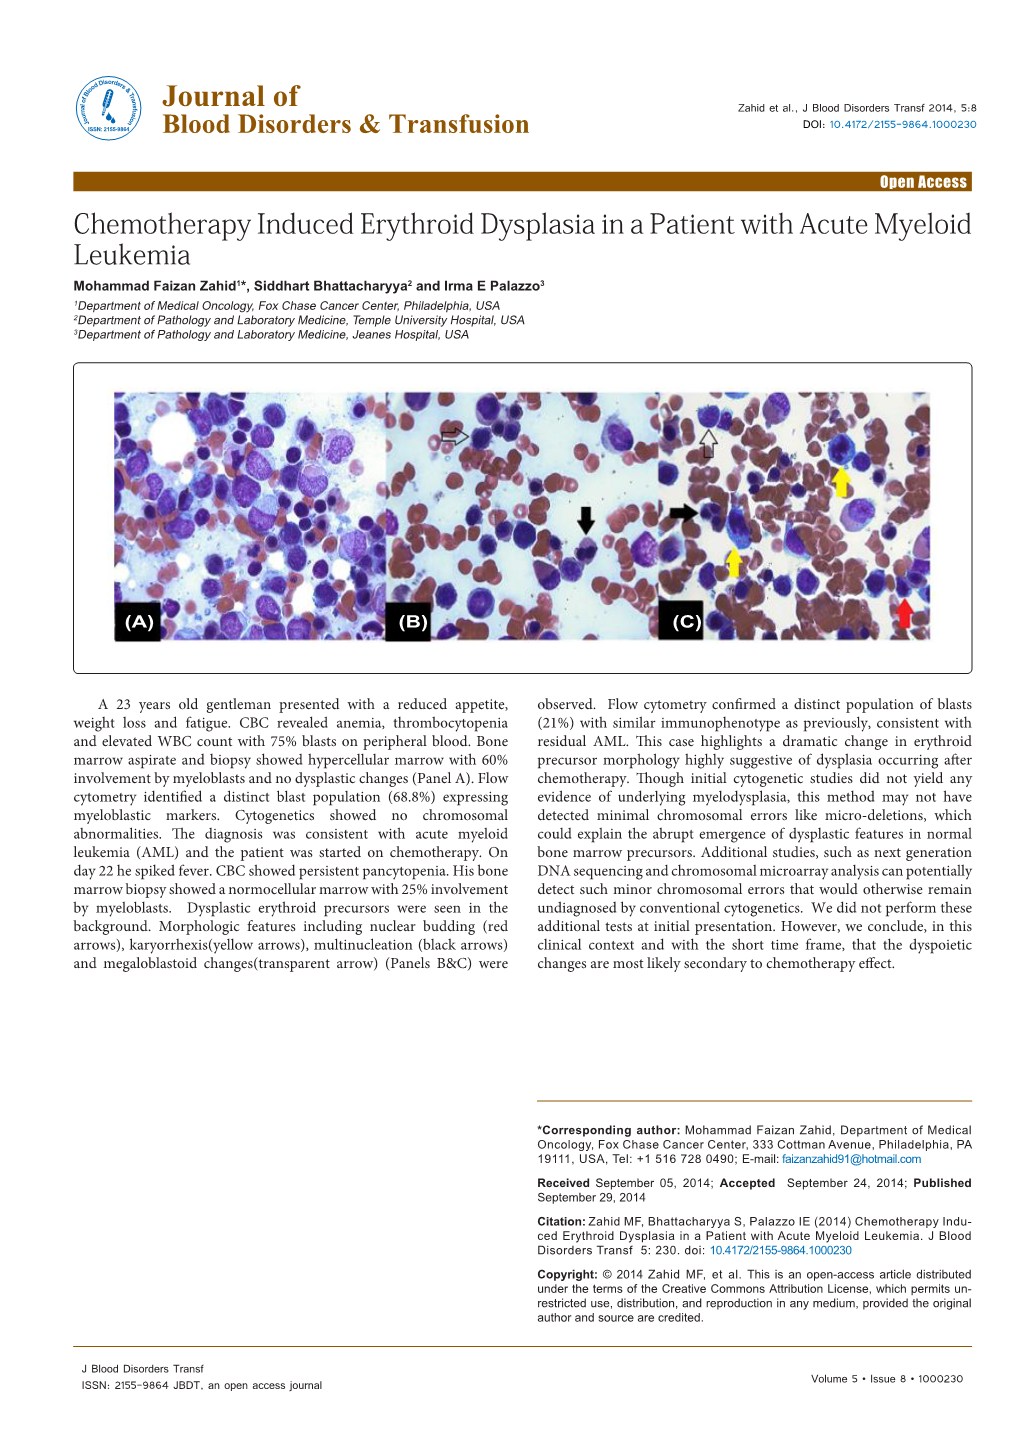 Chemotherapy Induced Erythroid Dysplasia in a Patient with Acute